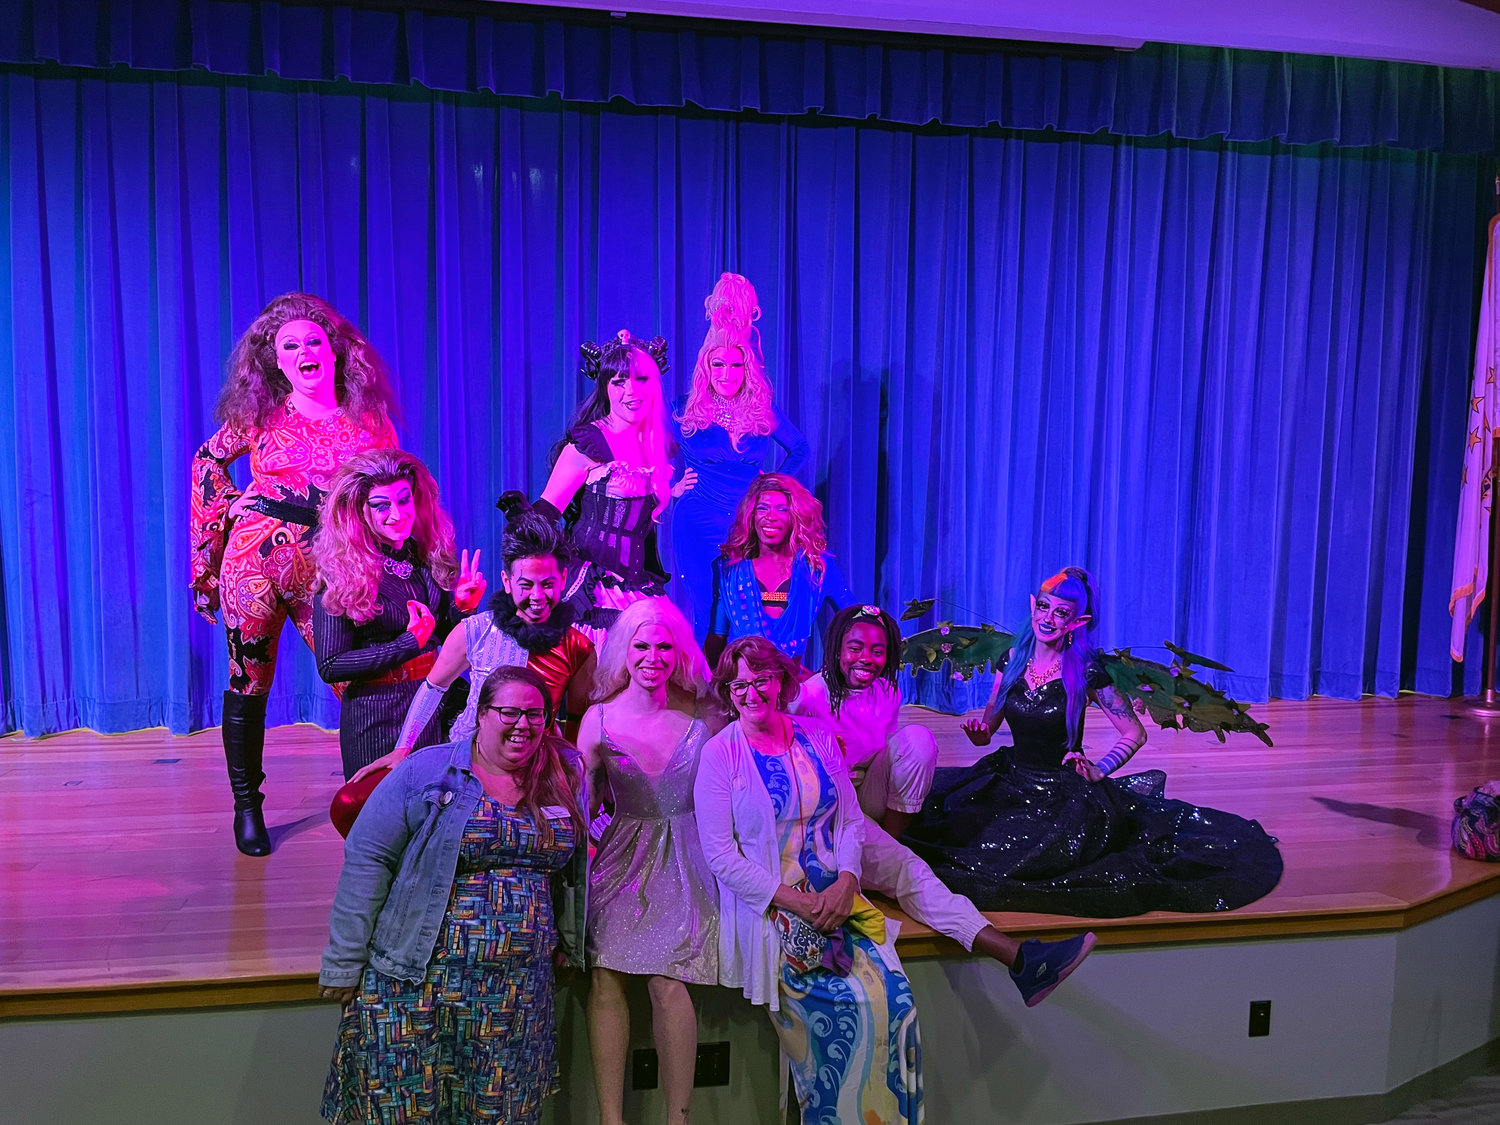 BaySide Pride recently organized a Drag Extravaganza that was held at Barrington Public Library.